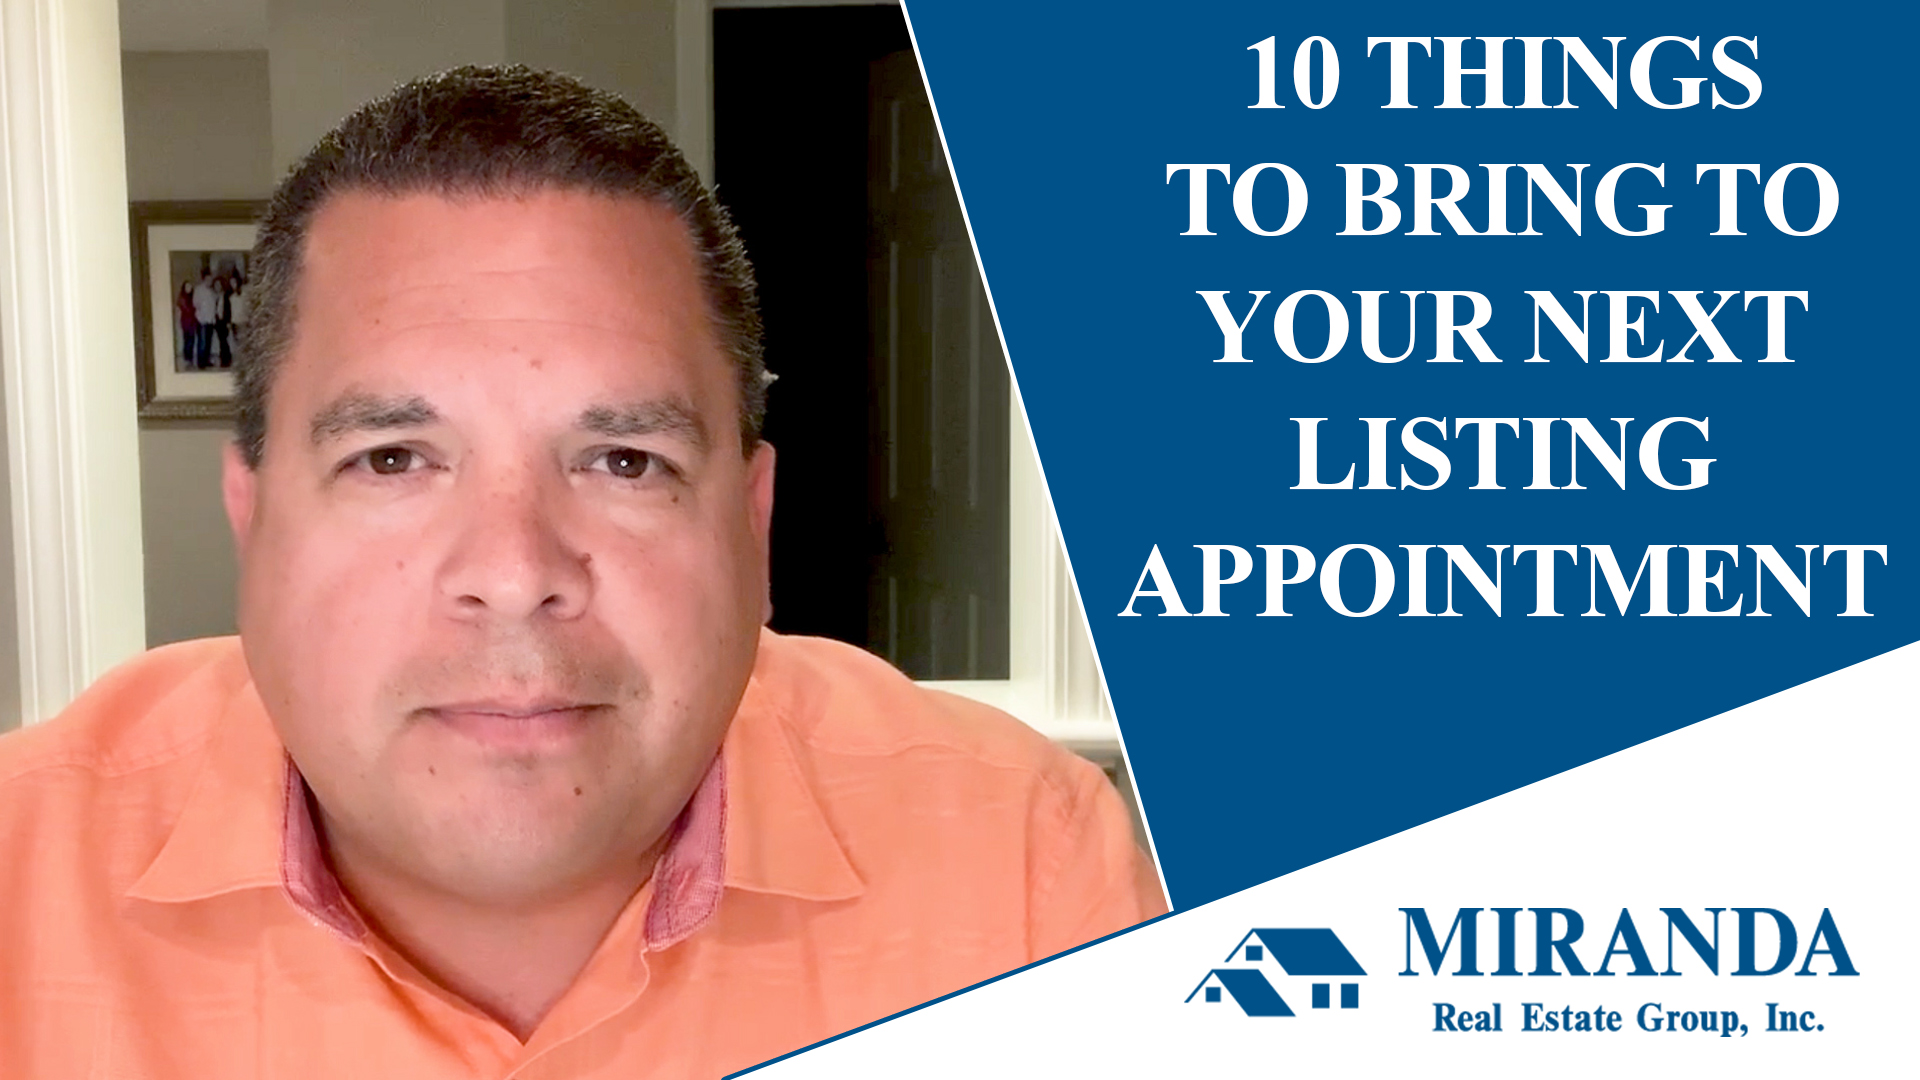 How Can You Stand Out in a Listing Appointment?